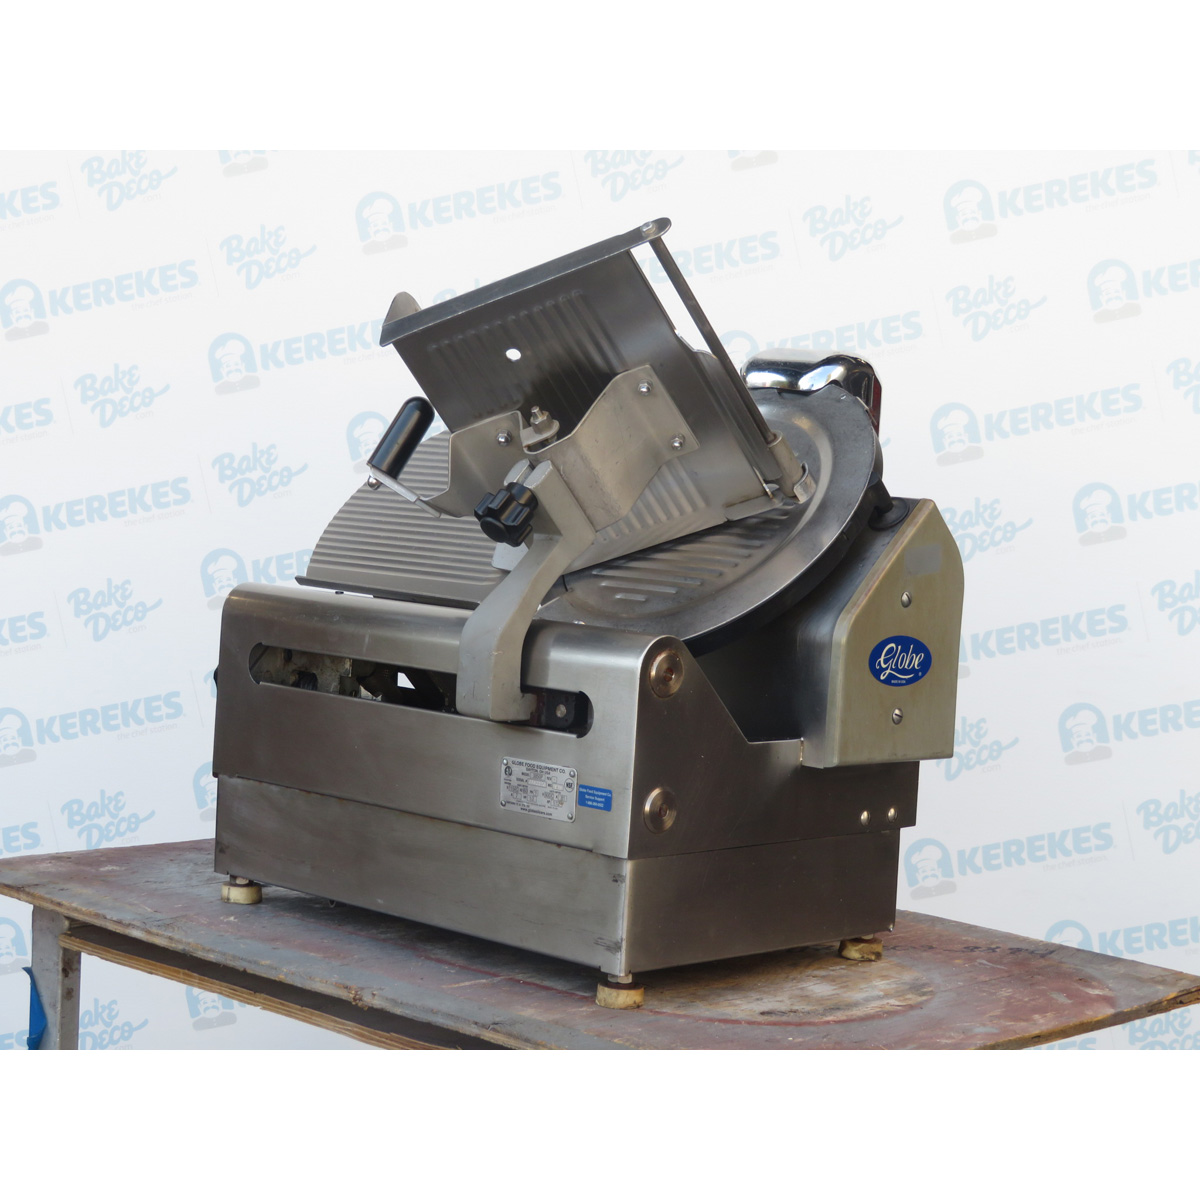 Globe 3850P Automatic Meat Slicer, Used Great Condition image 1